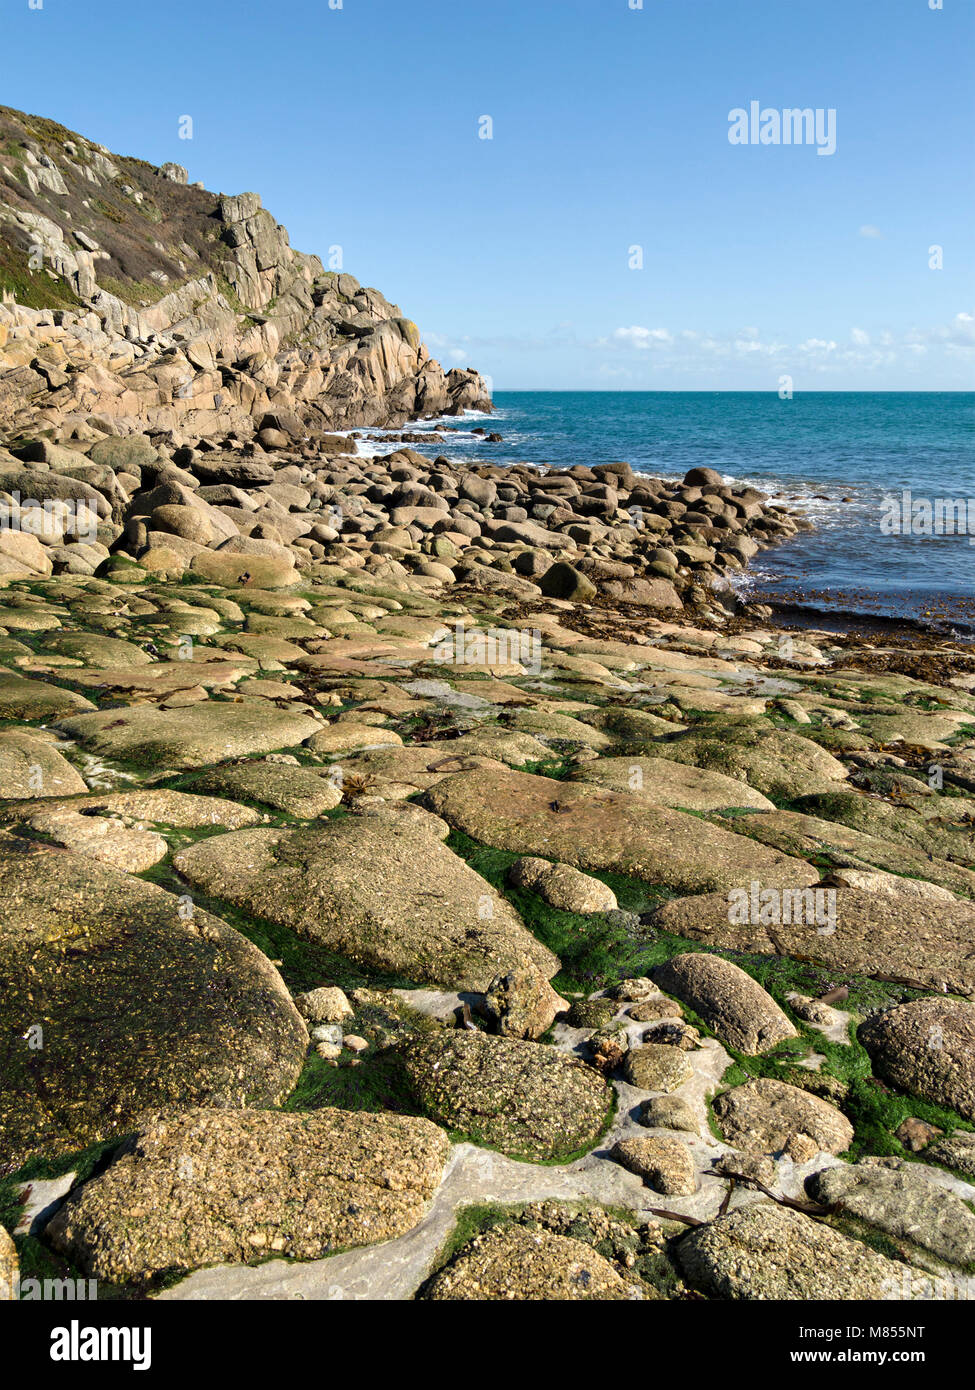 Stone boat slipway, rocky cliffs and sea, Penberth Cove harbour, Cornwall, England, UK Stock Photo